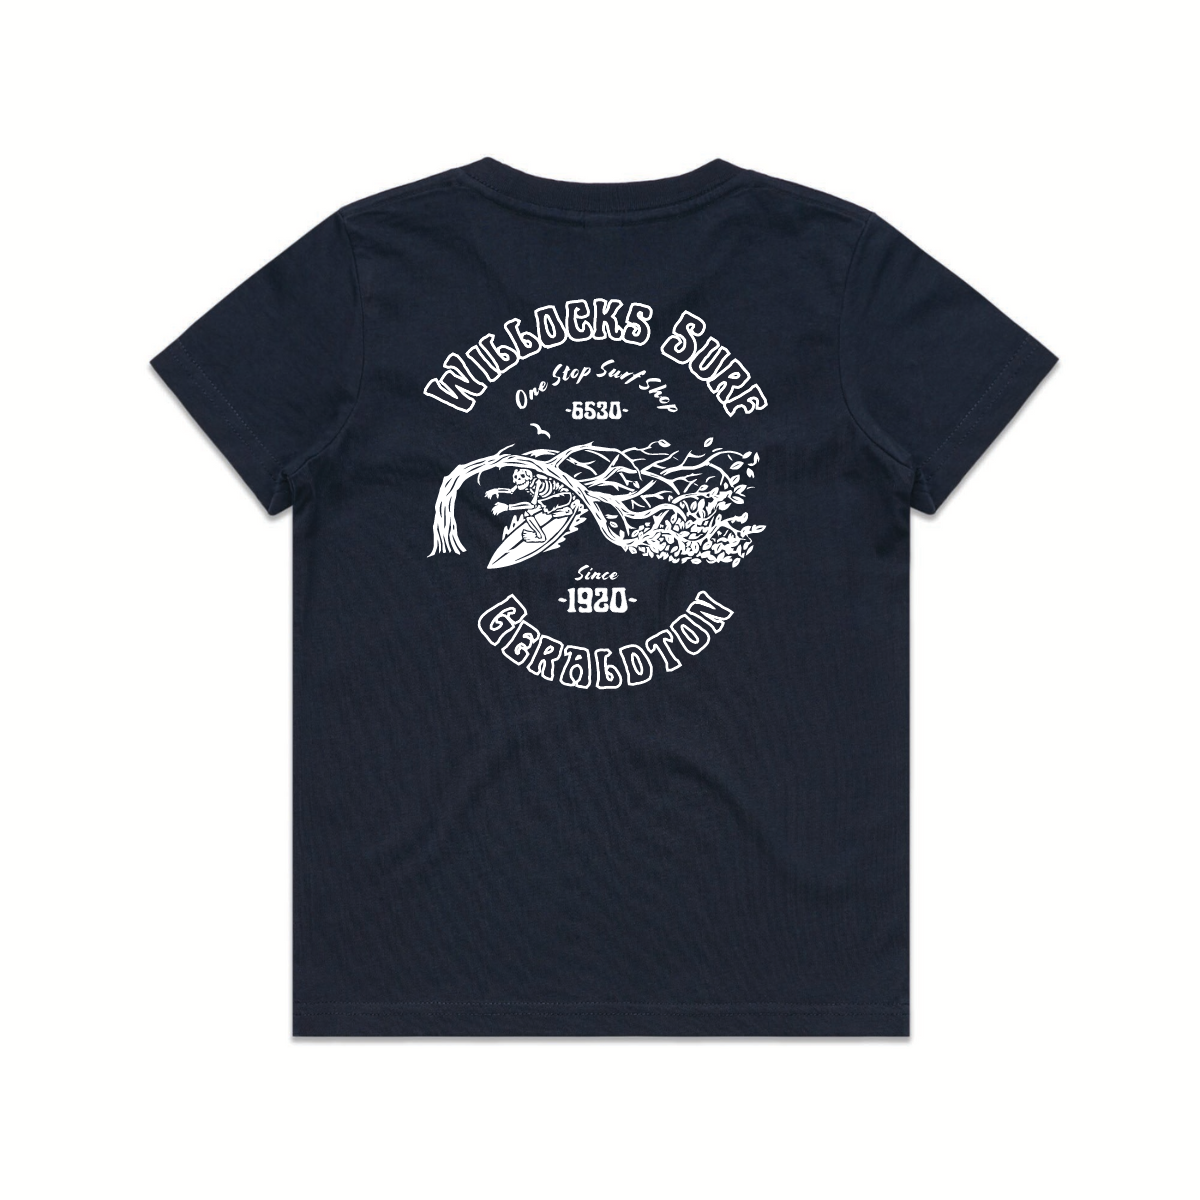 Leaning Tree Barrel Tee Youth